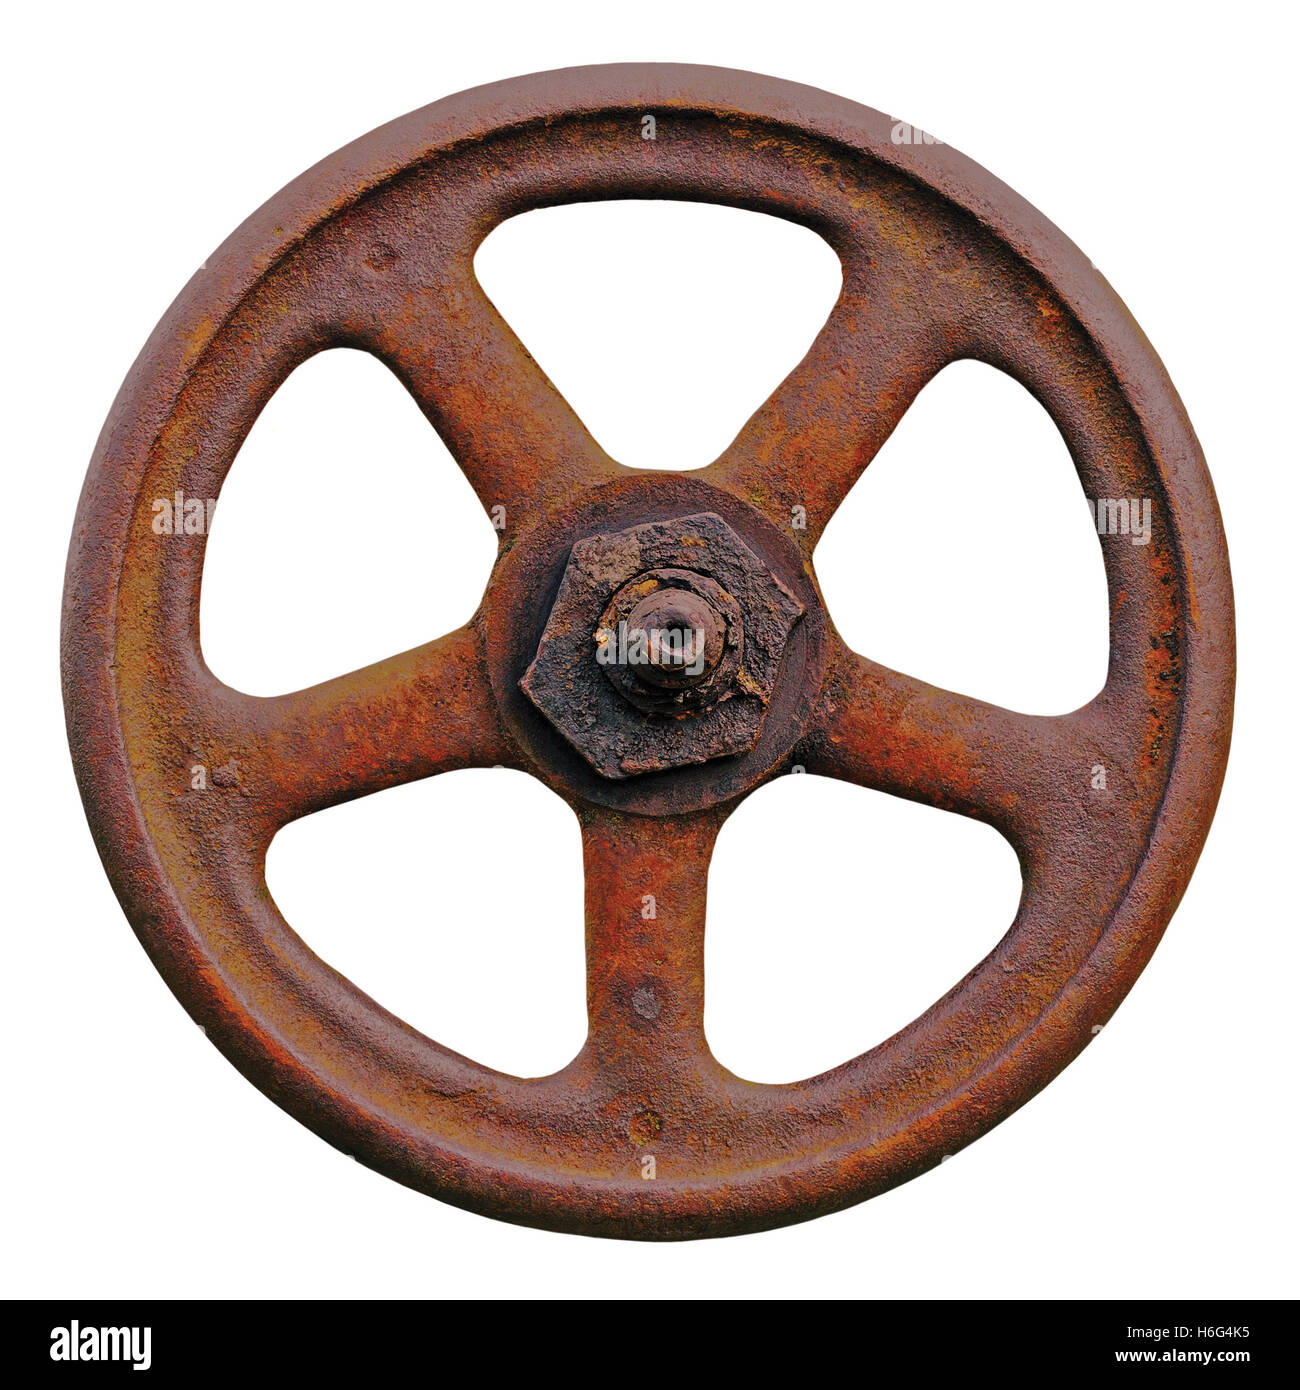 Industrial Valve Wheel And Rusty Stem, Old Aged Weathered Rust Grunge Latch Macro Closeup Isolated Stock Photo